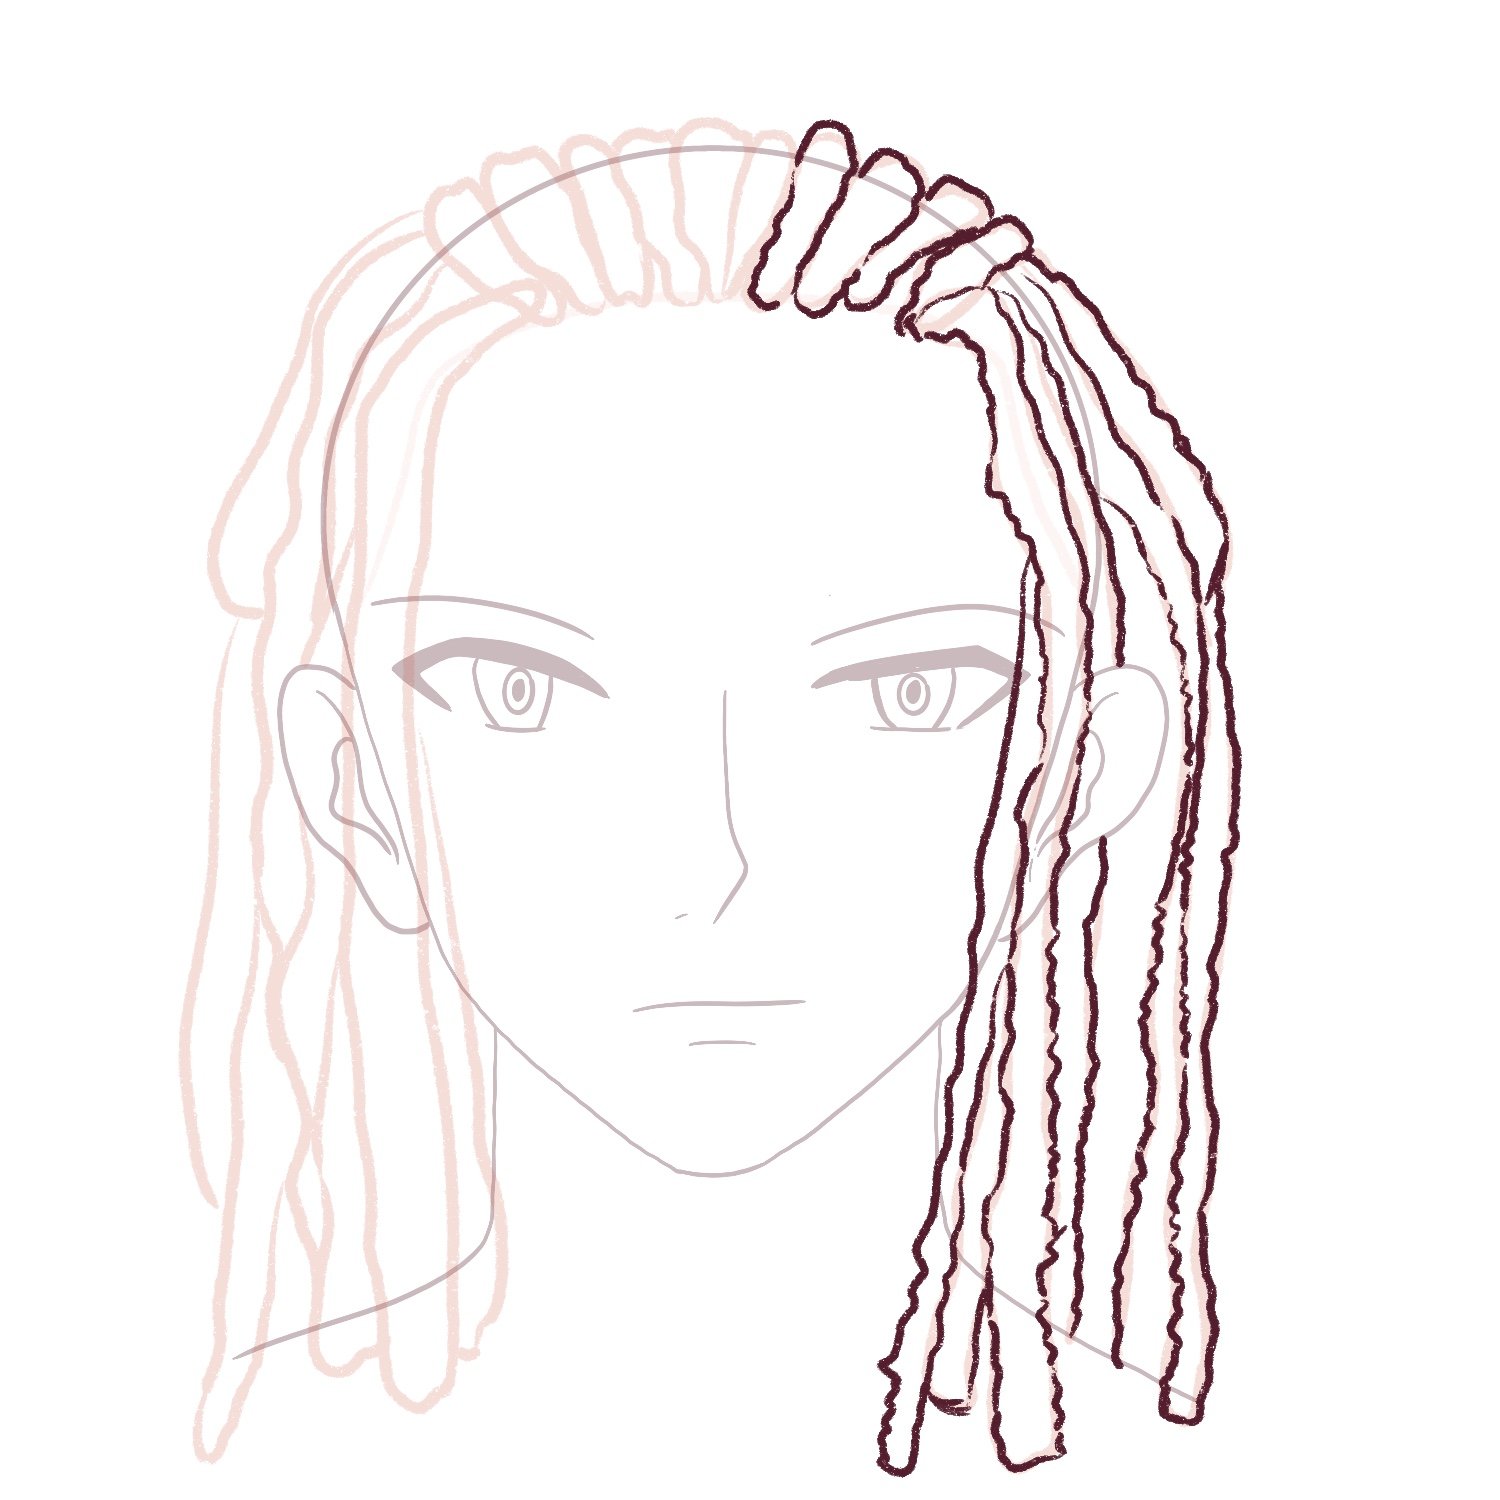 How to Draw Anime Dreads for a Male [Easy Tutorial for Beginners]